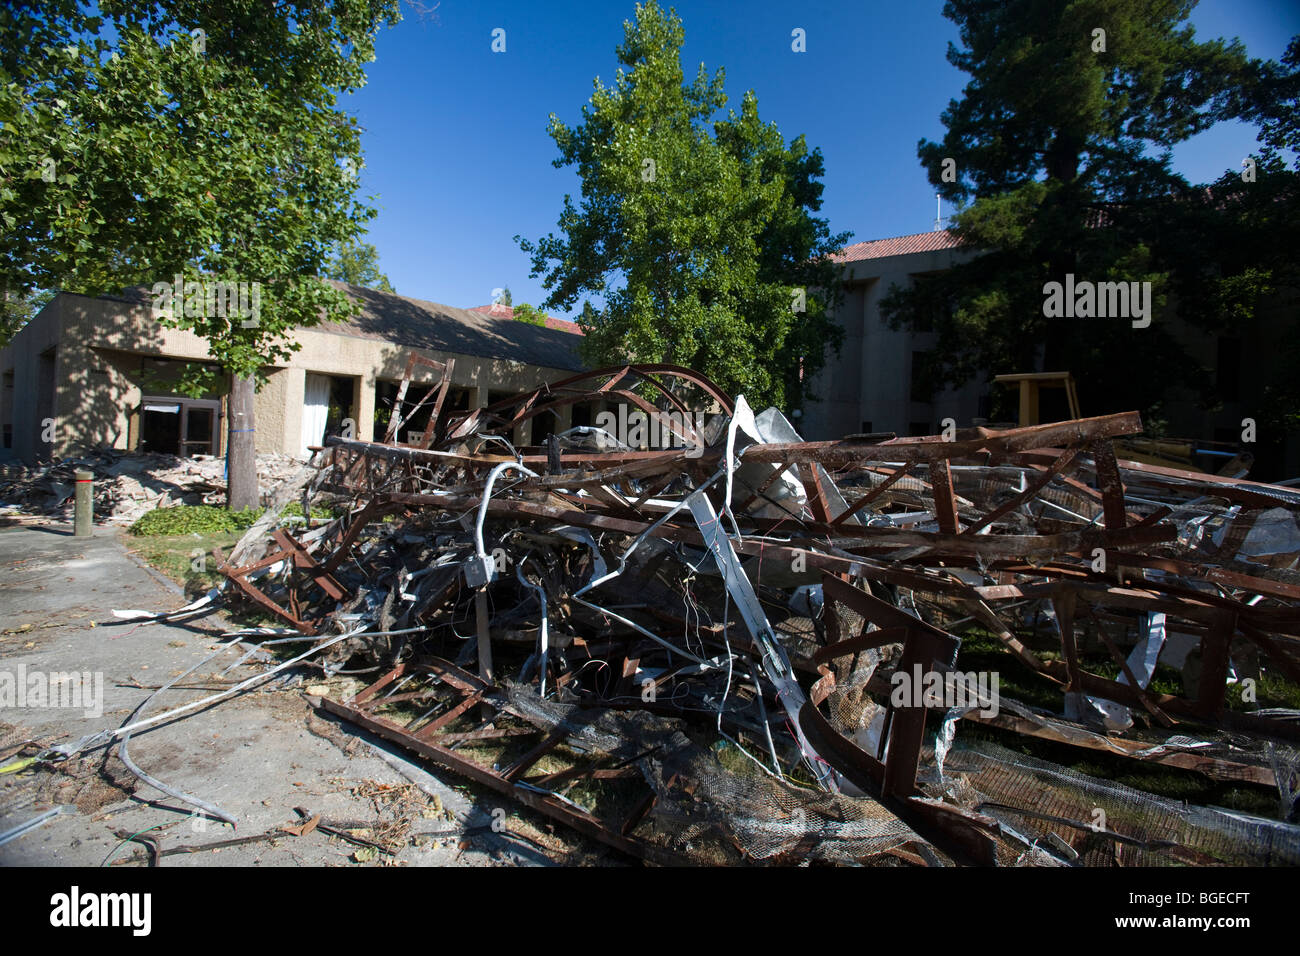 Pile of rusted steel support beams and rubble from demolition of Kresge Auditorium Stock Photo